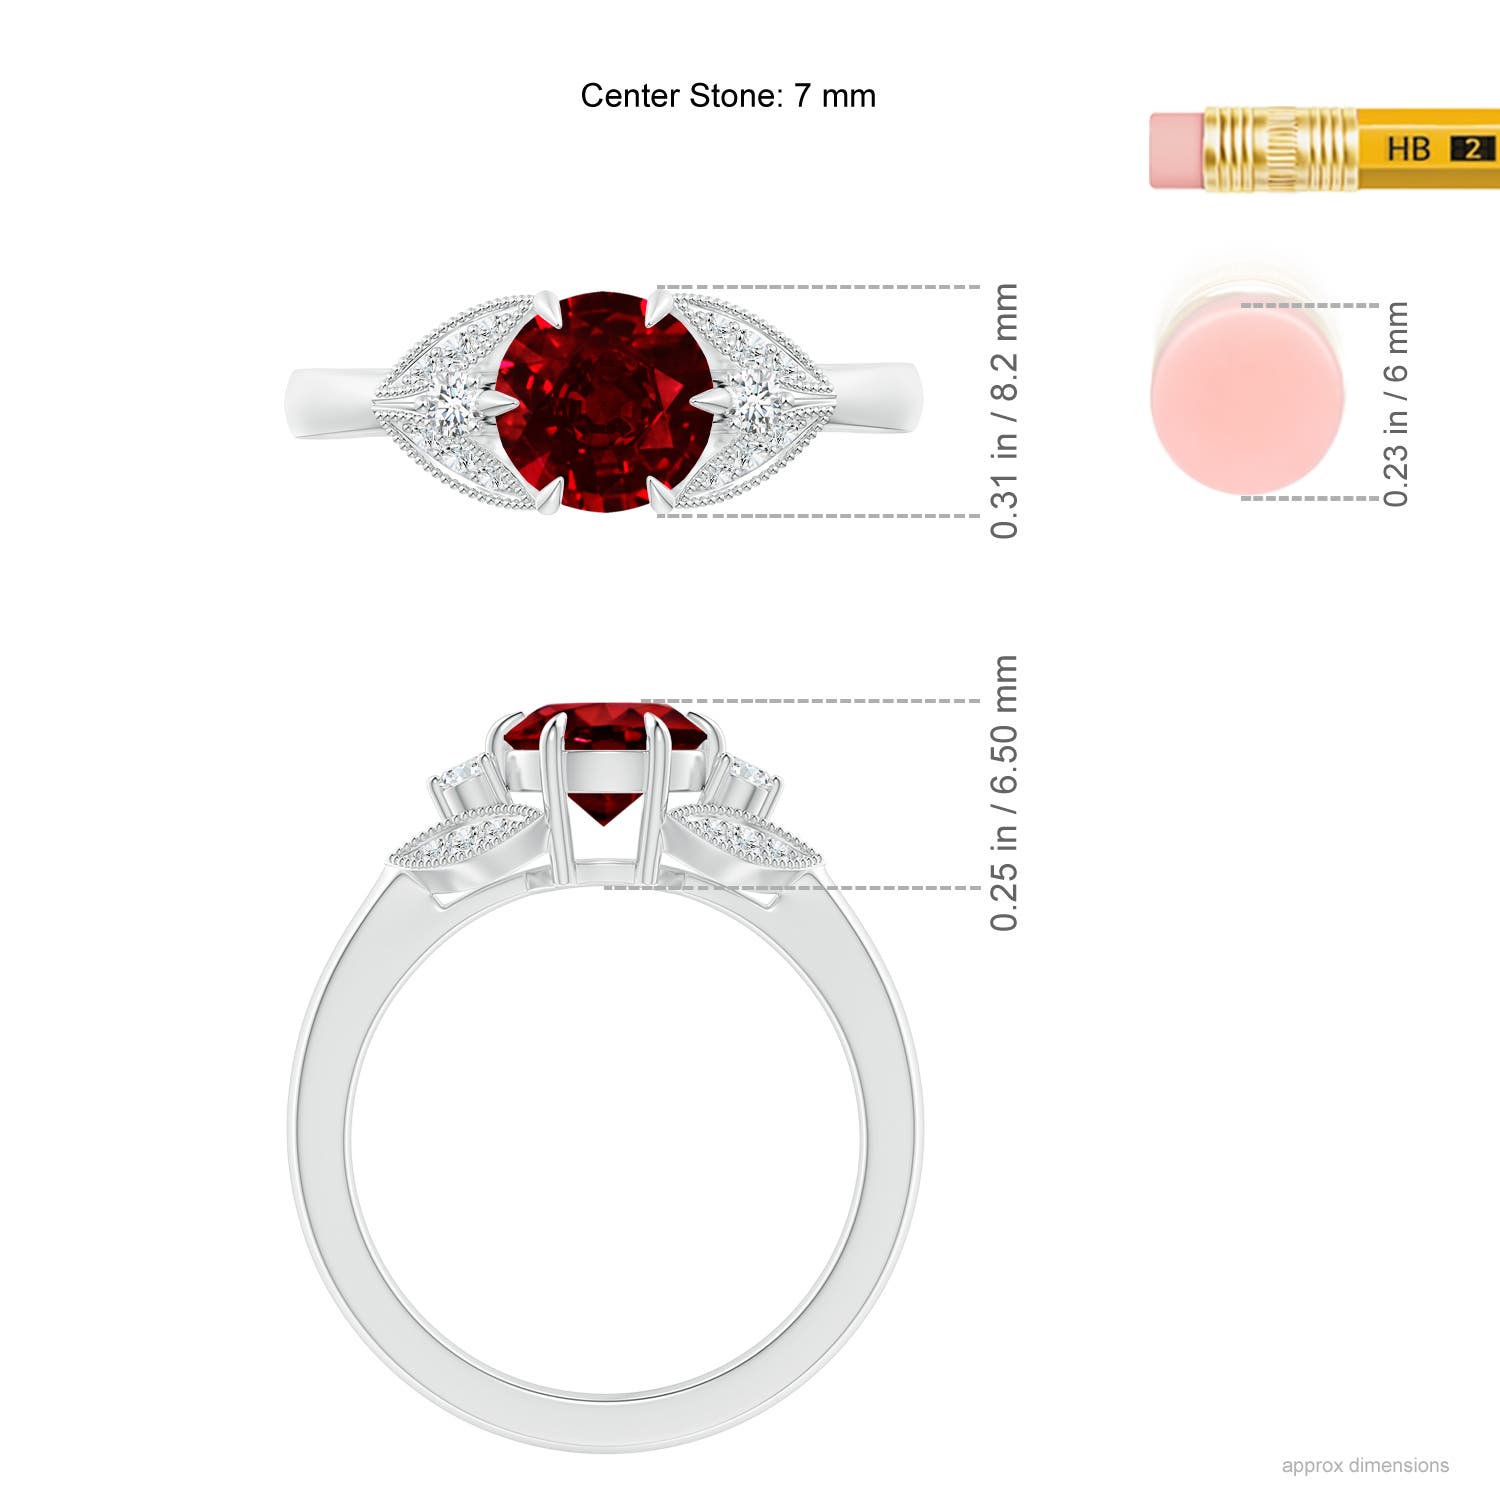 AAAA - Ruby / 1.64 CT / 14 KT White Gold